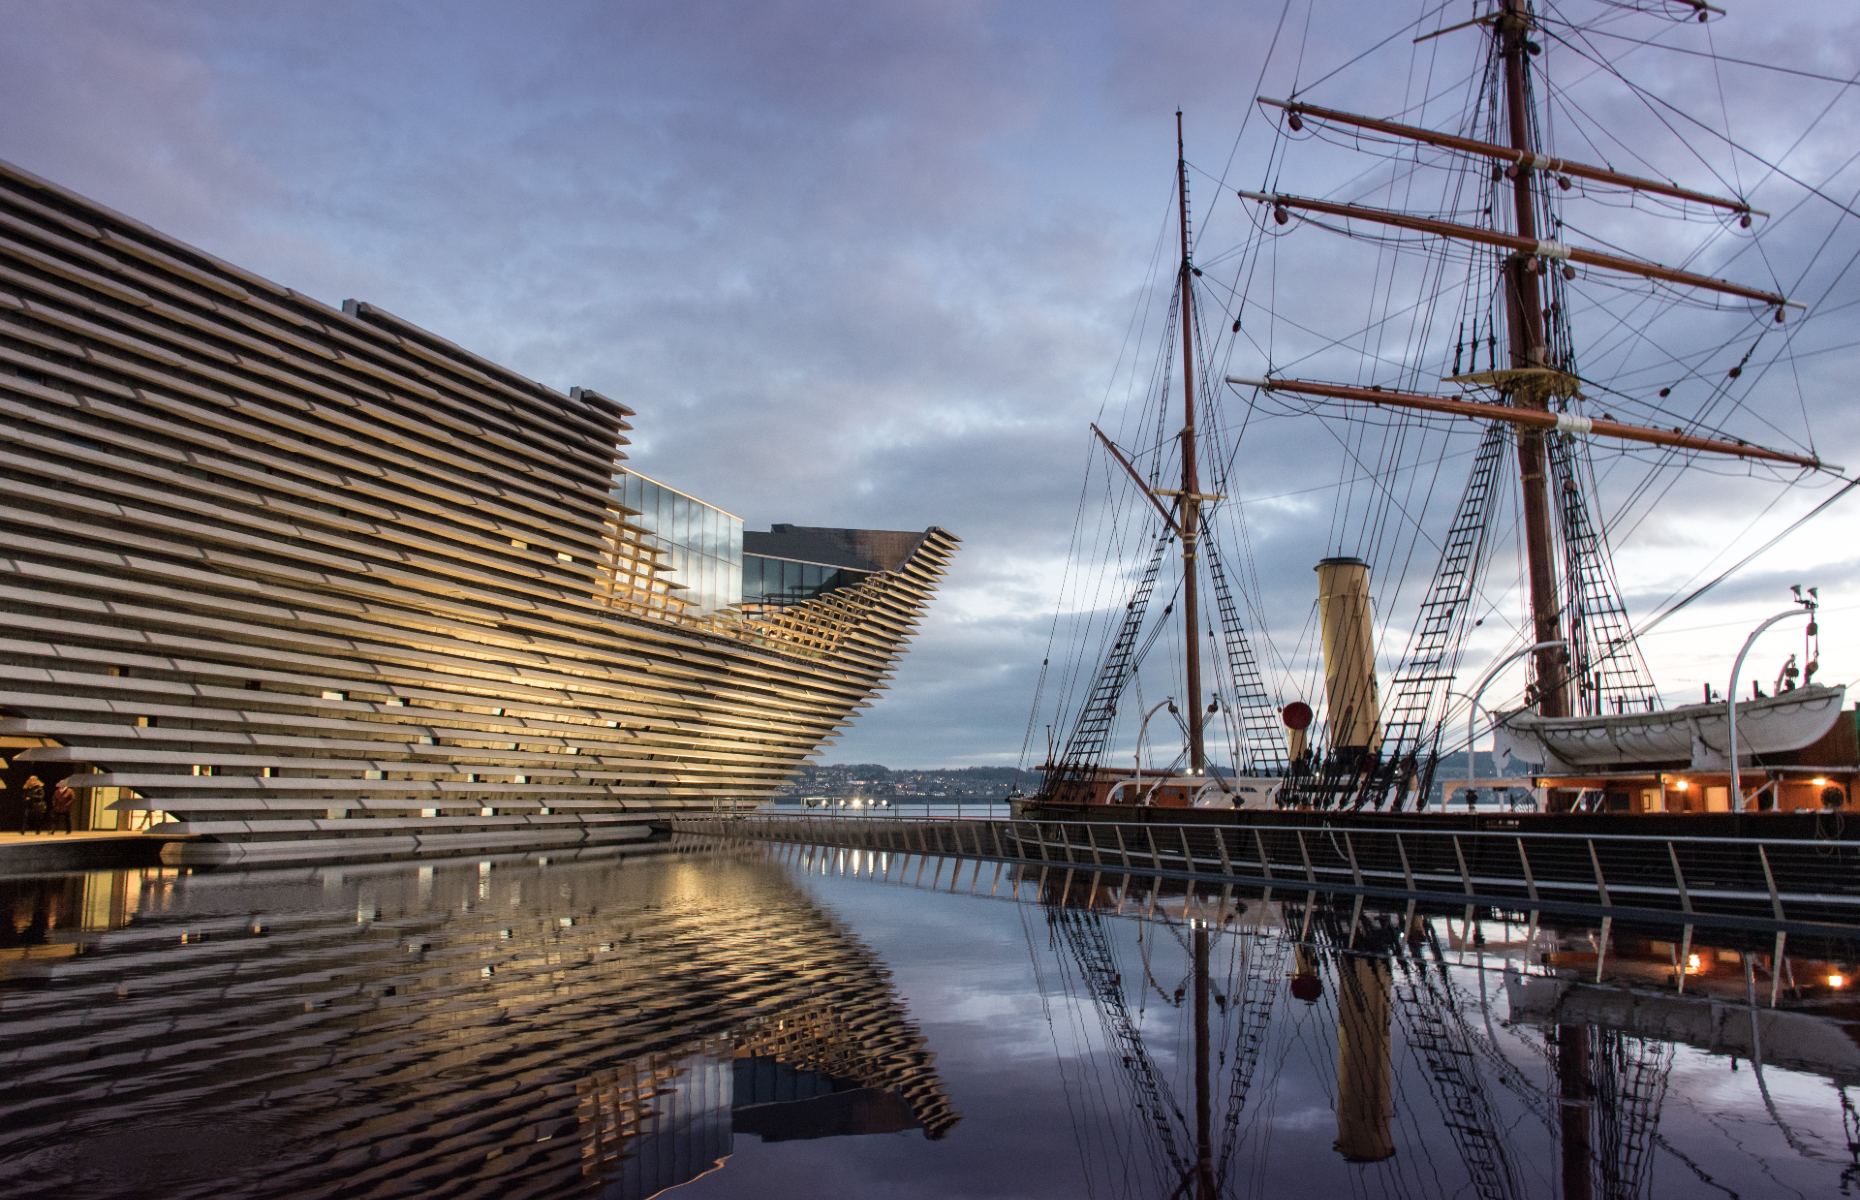 The V&A Museum, Dundee (ROBIN MACGREGOR/Shutterstock)